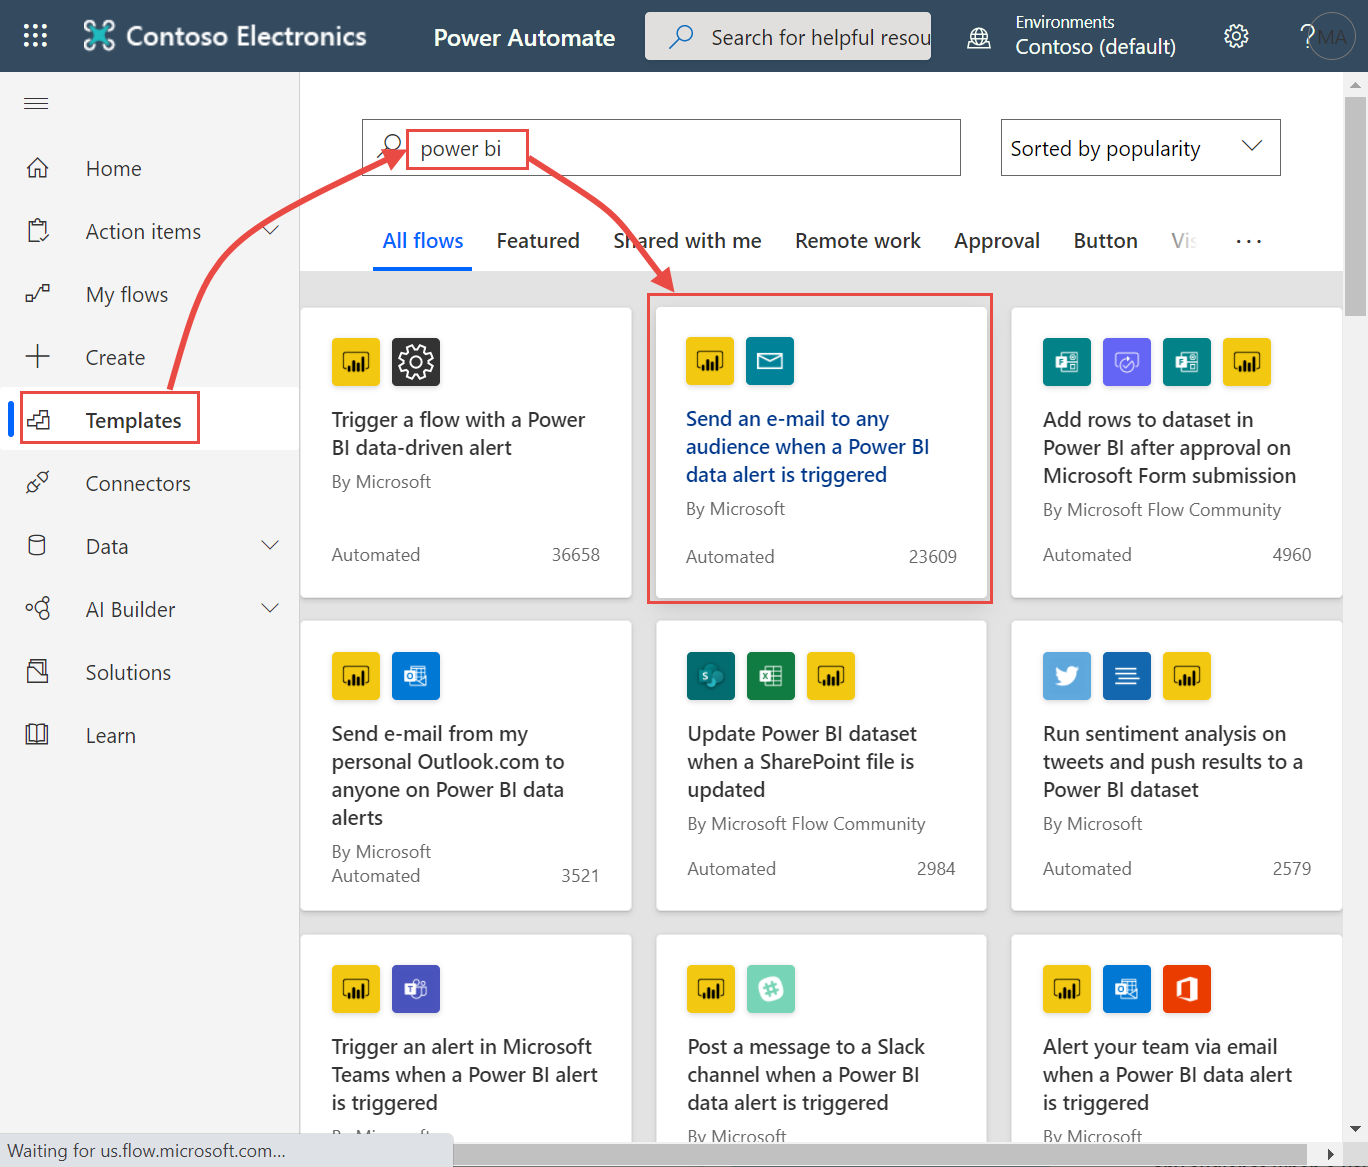 Screenshot of Power Automate Send an e-mail to any audience when a Power BI data alert is triggered template.